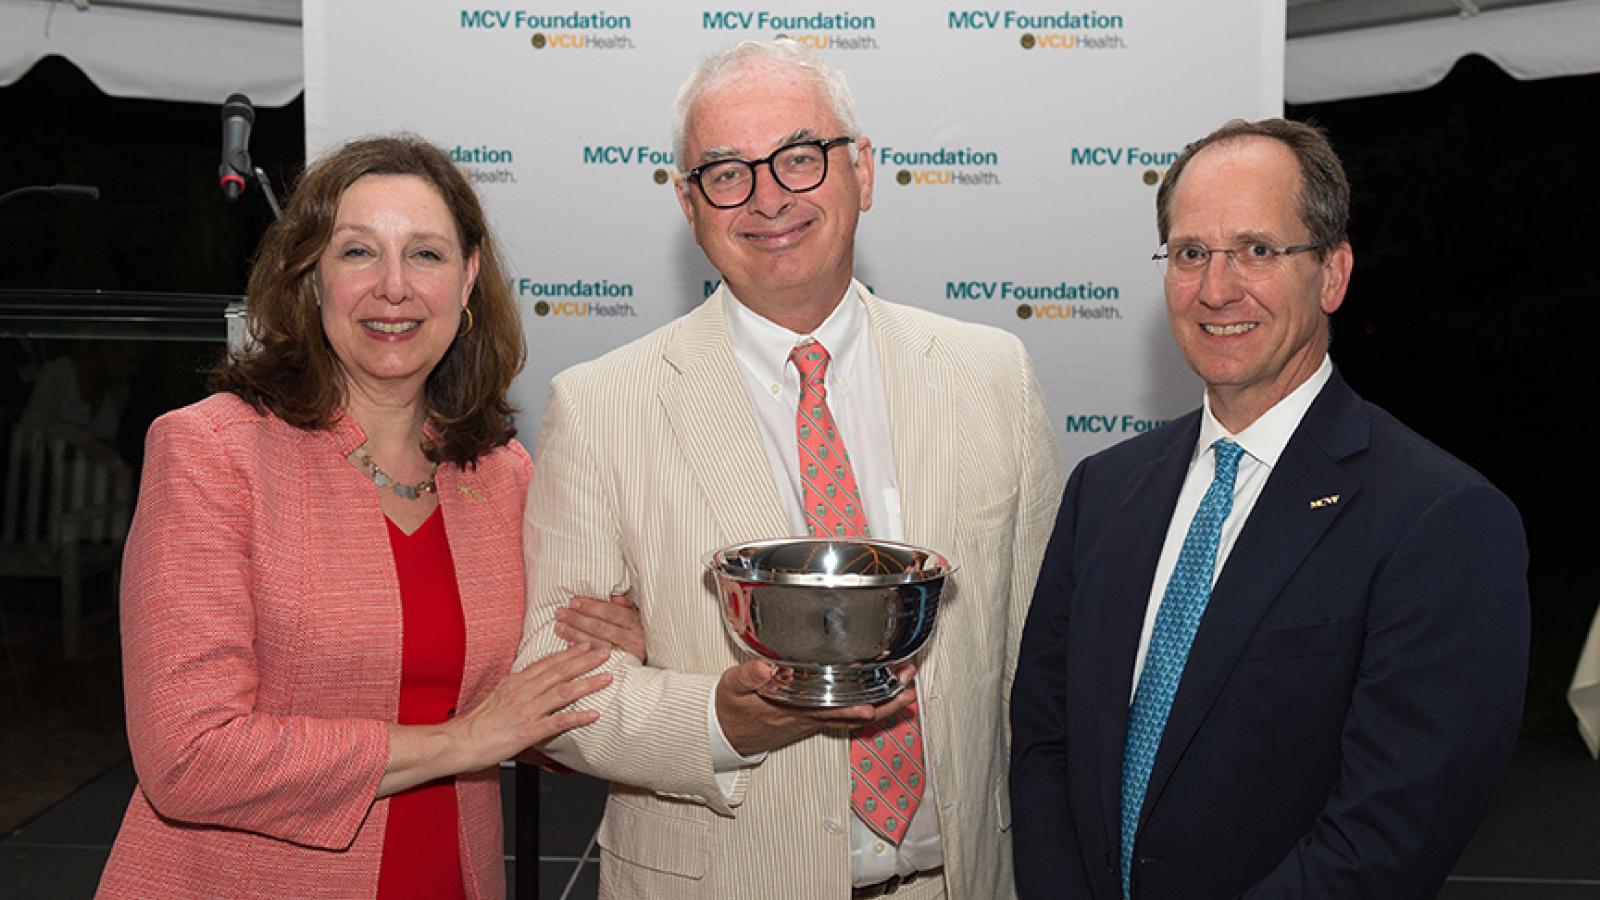 Peter Buckley, M.D., with Margaret Ann Bollmeier, president and CEO of the MCV Foundation, and Wyatt Beazley IV, the foundation's board chair.